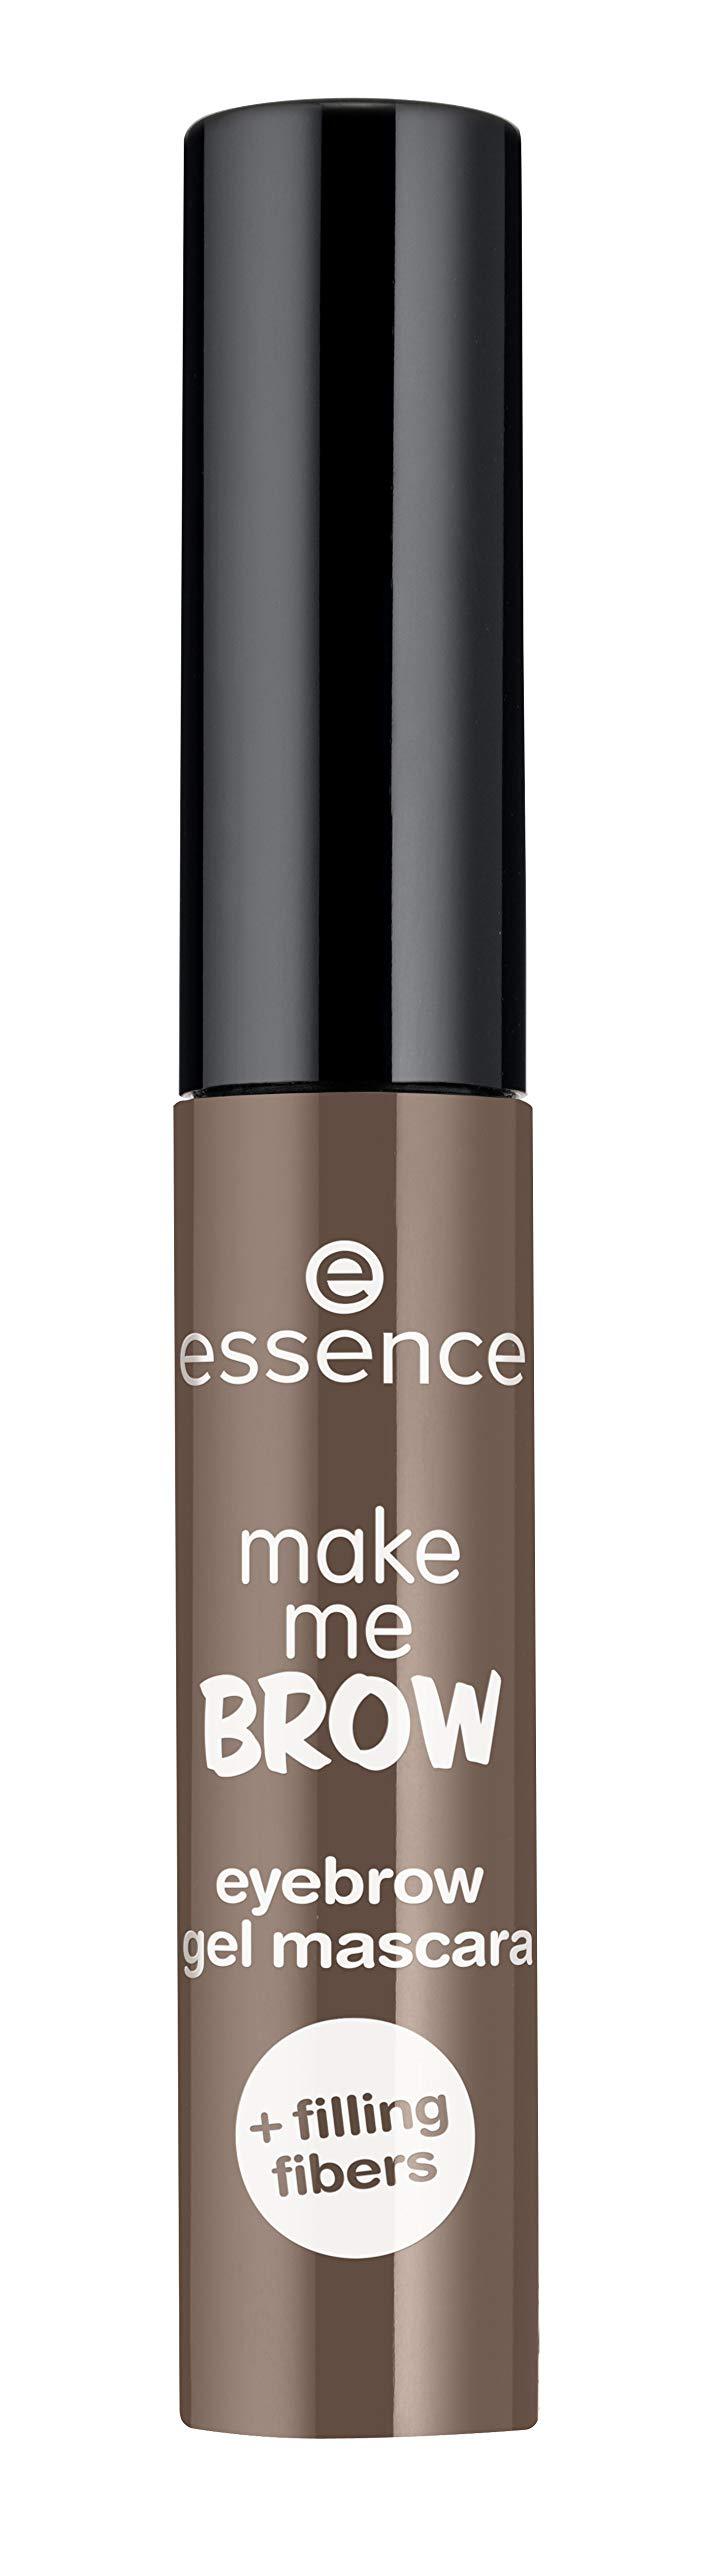 essence | 3-Pack Make Me Brow Eyebrow Gel Mascara | Infused with Fibers to Fill & Sculpt | Vegan & Paraben Free | Cruelty Free (02 | Browny Brows) 02 | Browny Brows - BeesActive Australia